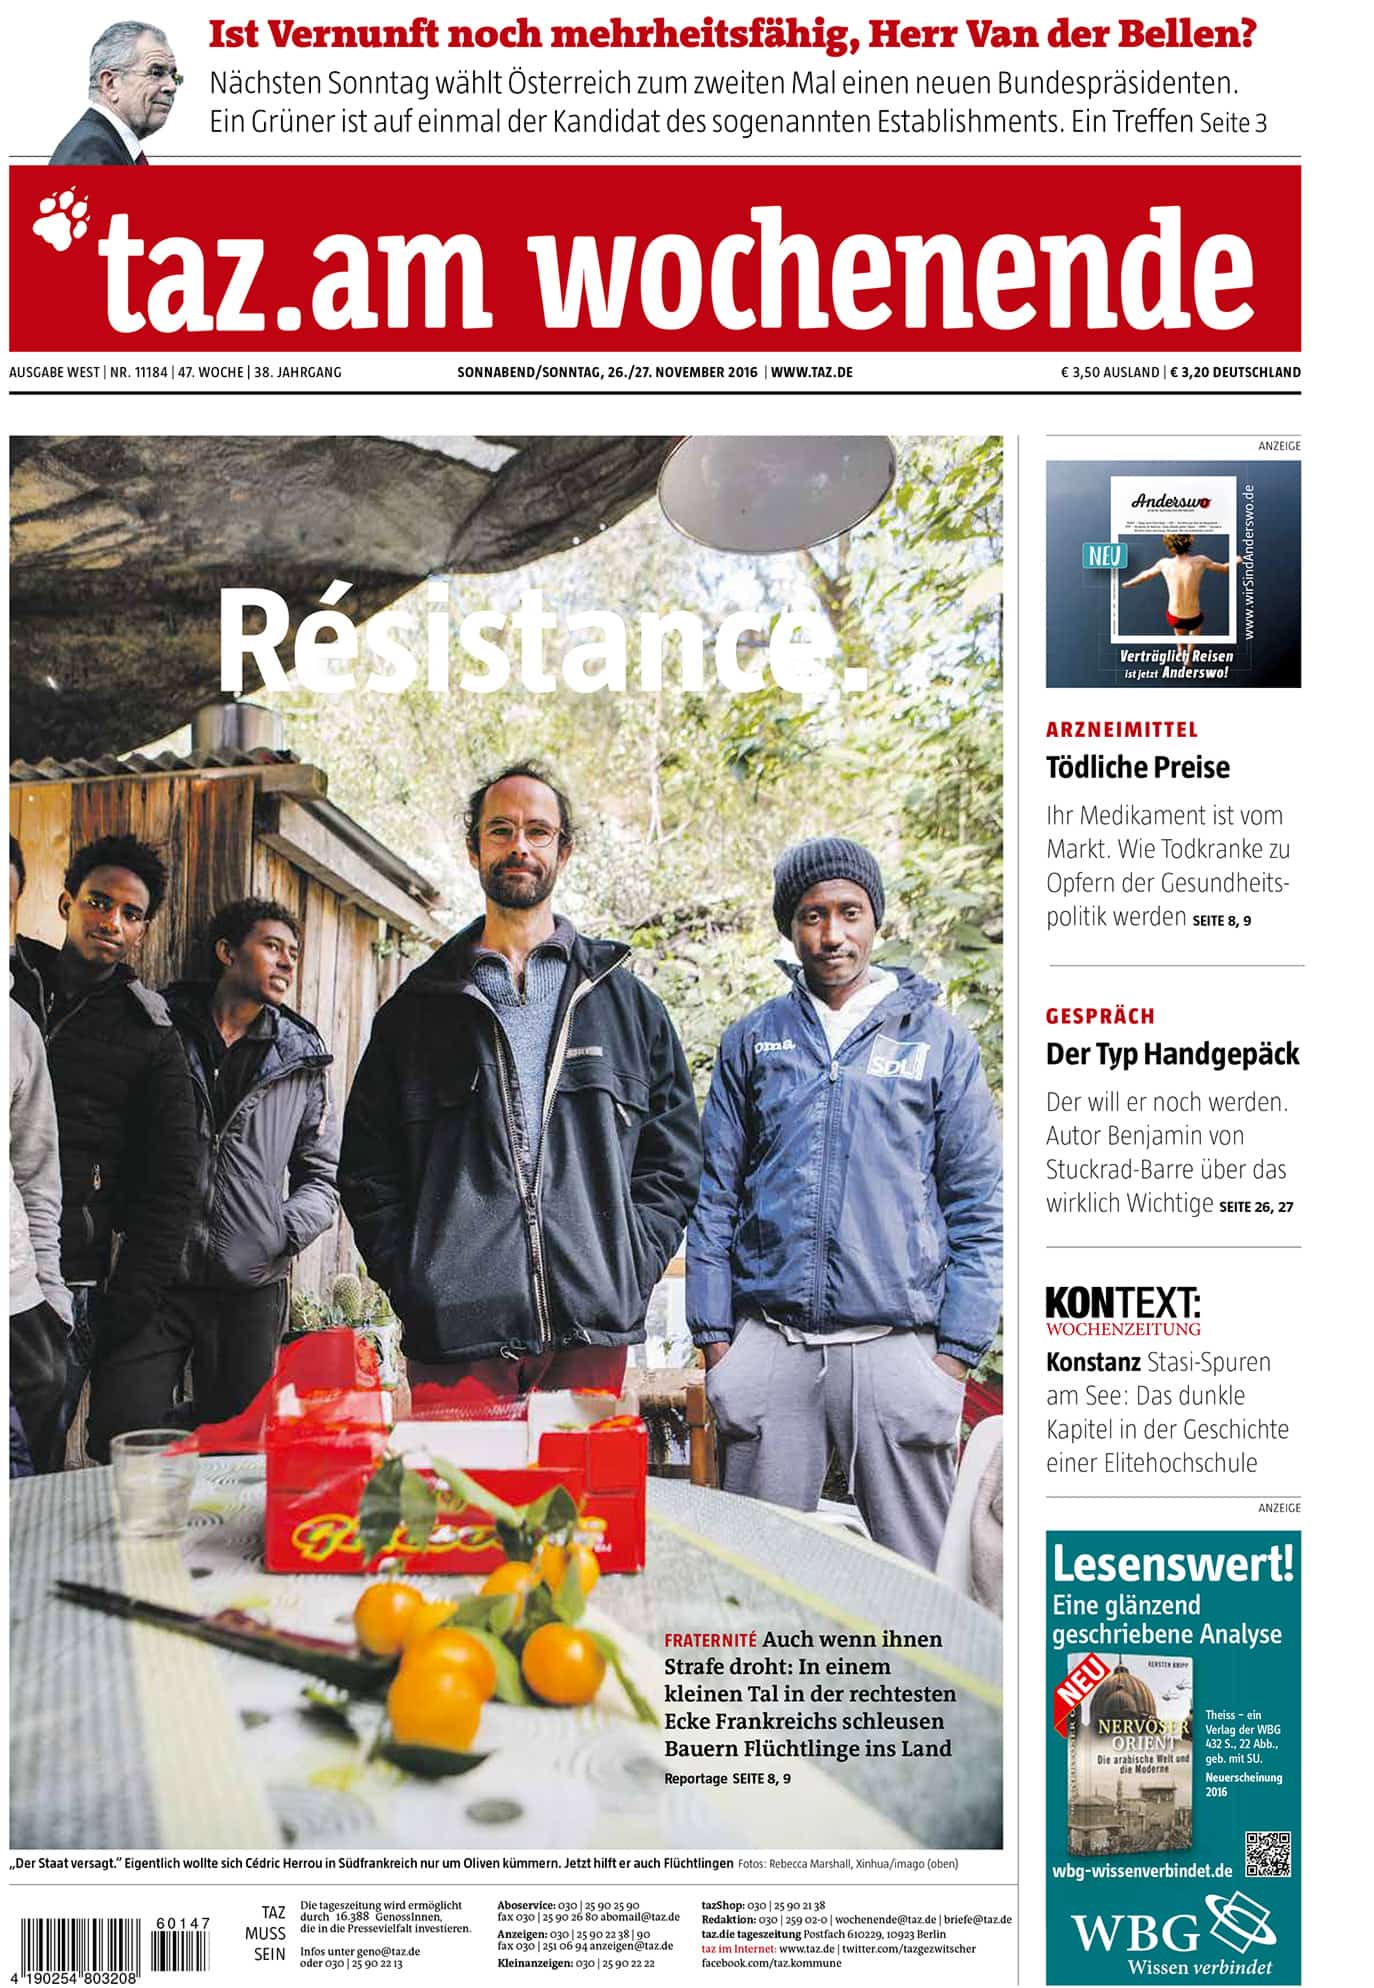 Tearsheet showing text and photograph of a group of men on cover of Taz am Wochenende weekend newspaper